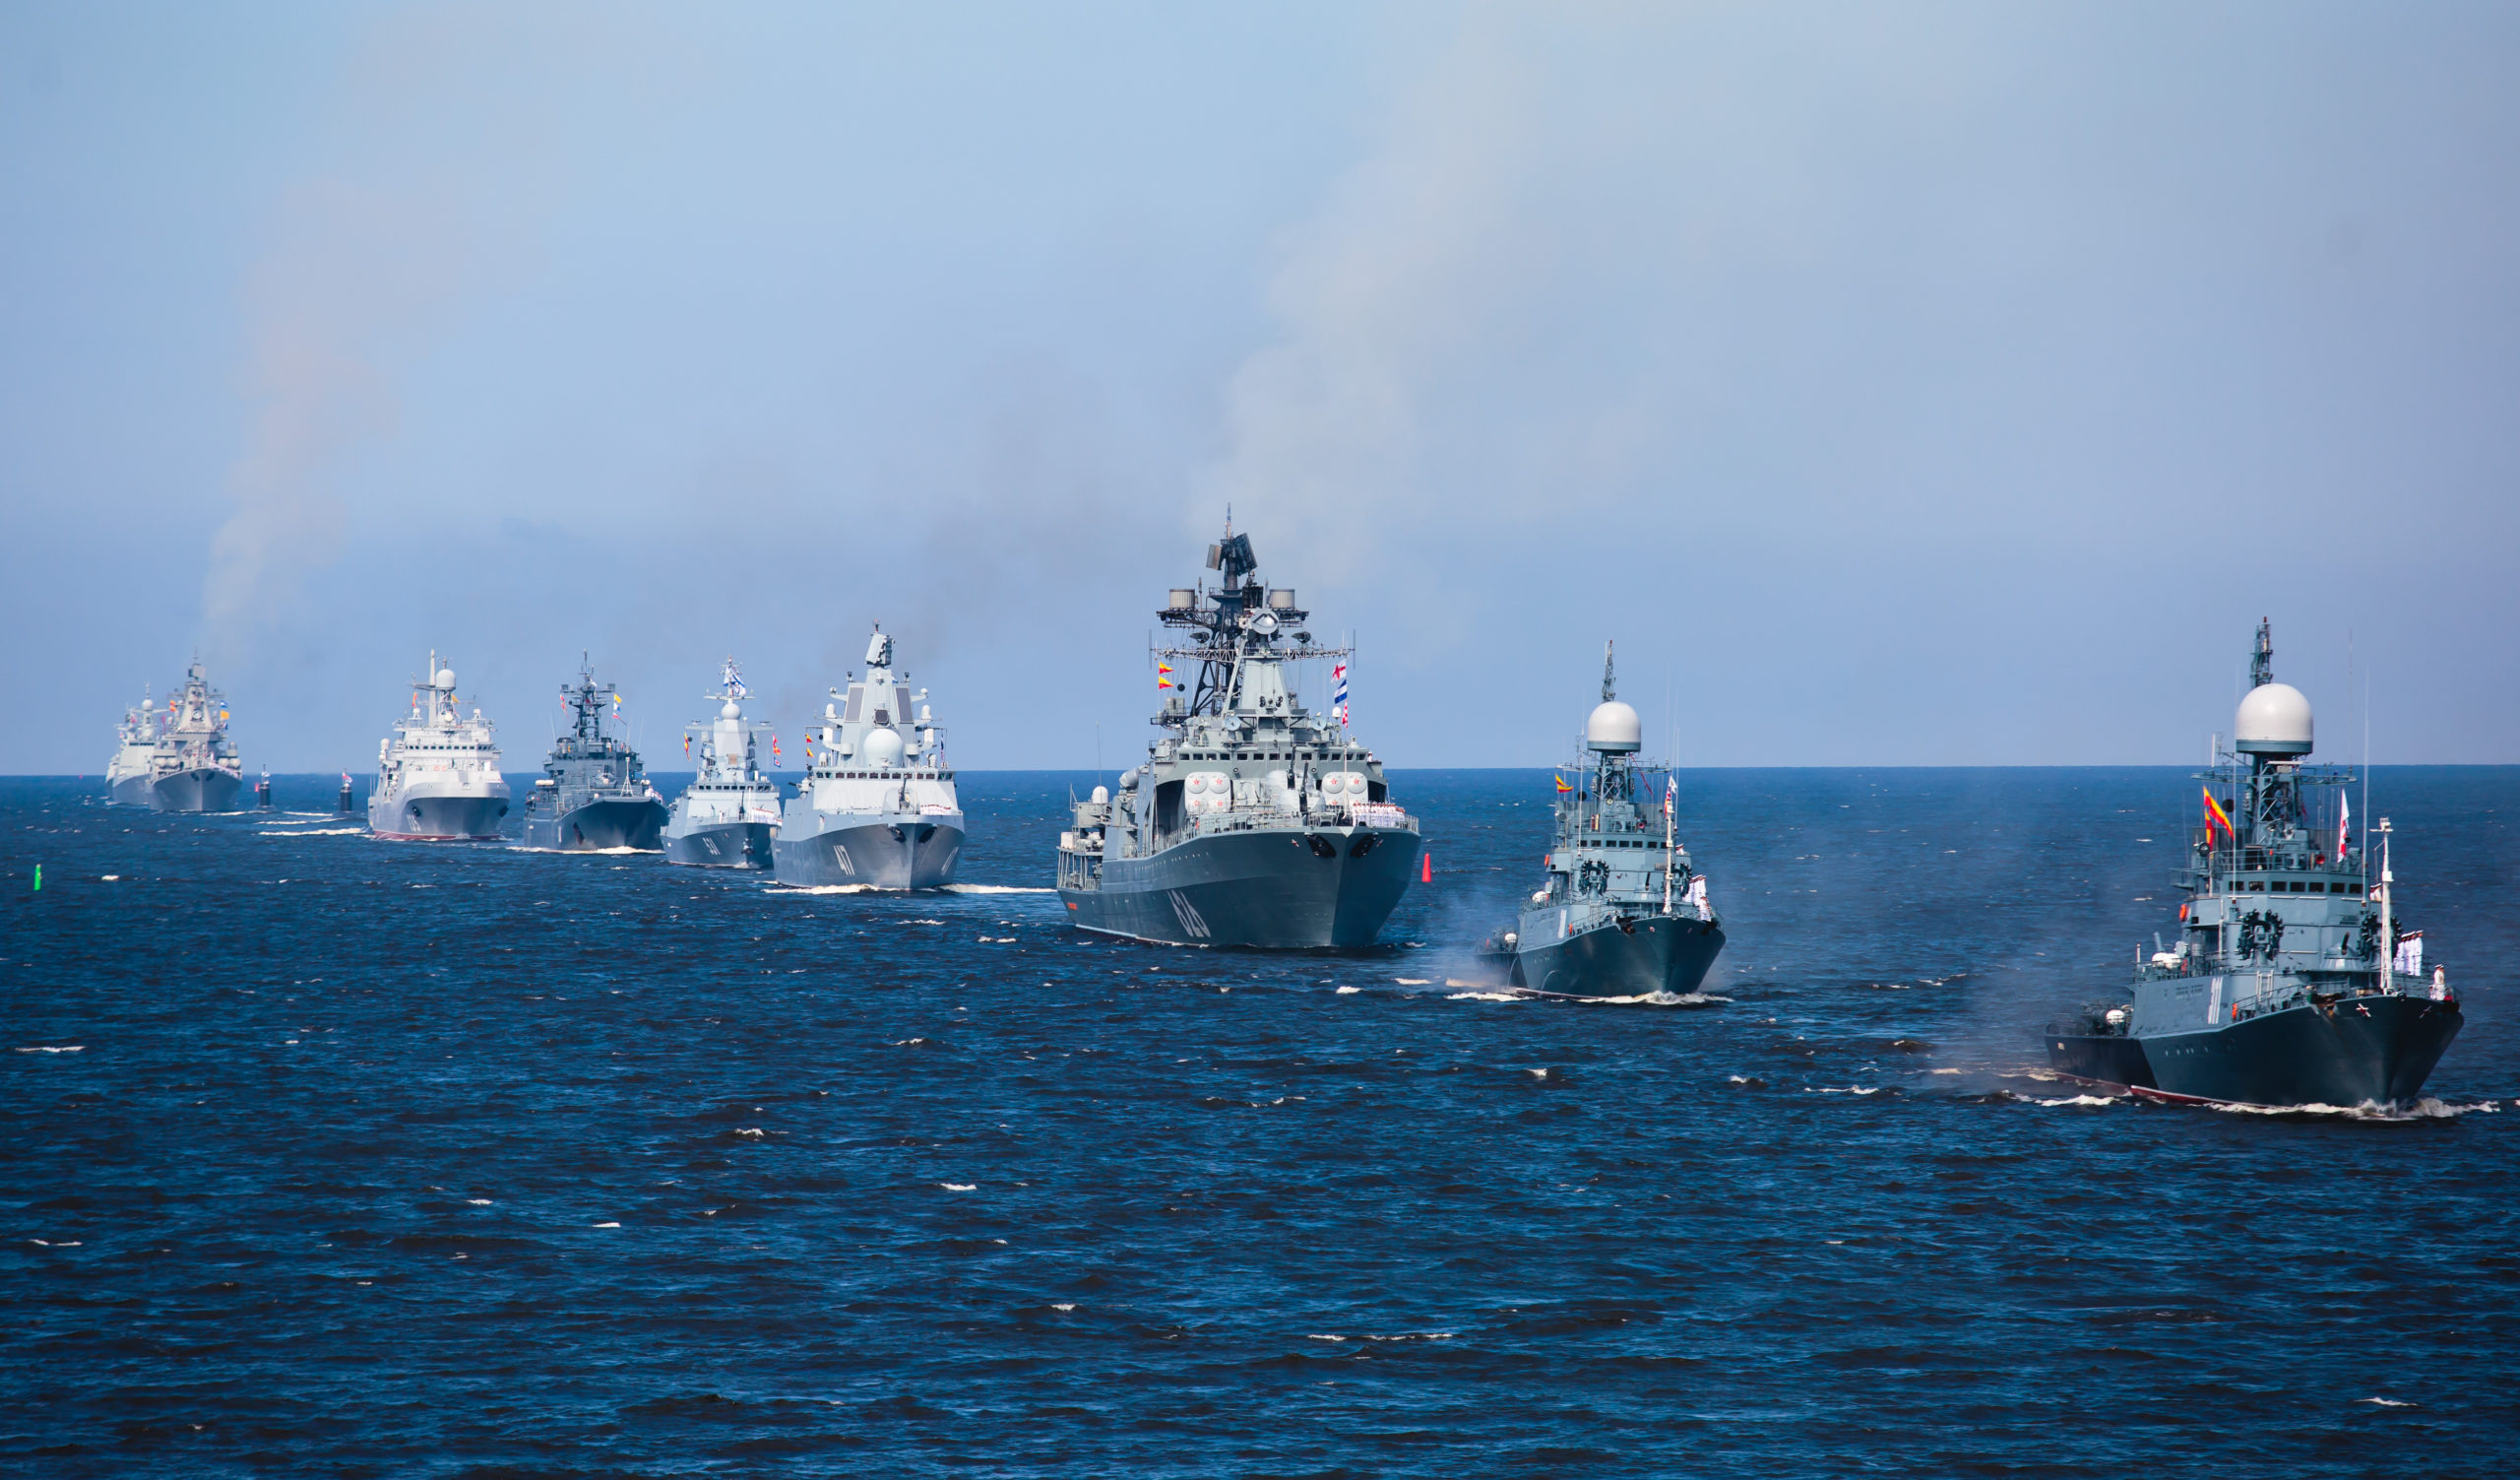 Maritime Security Issues in the Baltic Sea Region